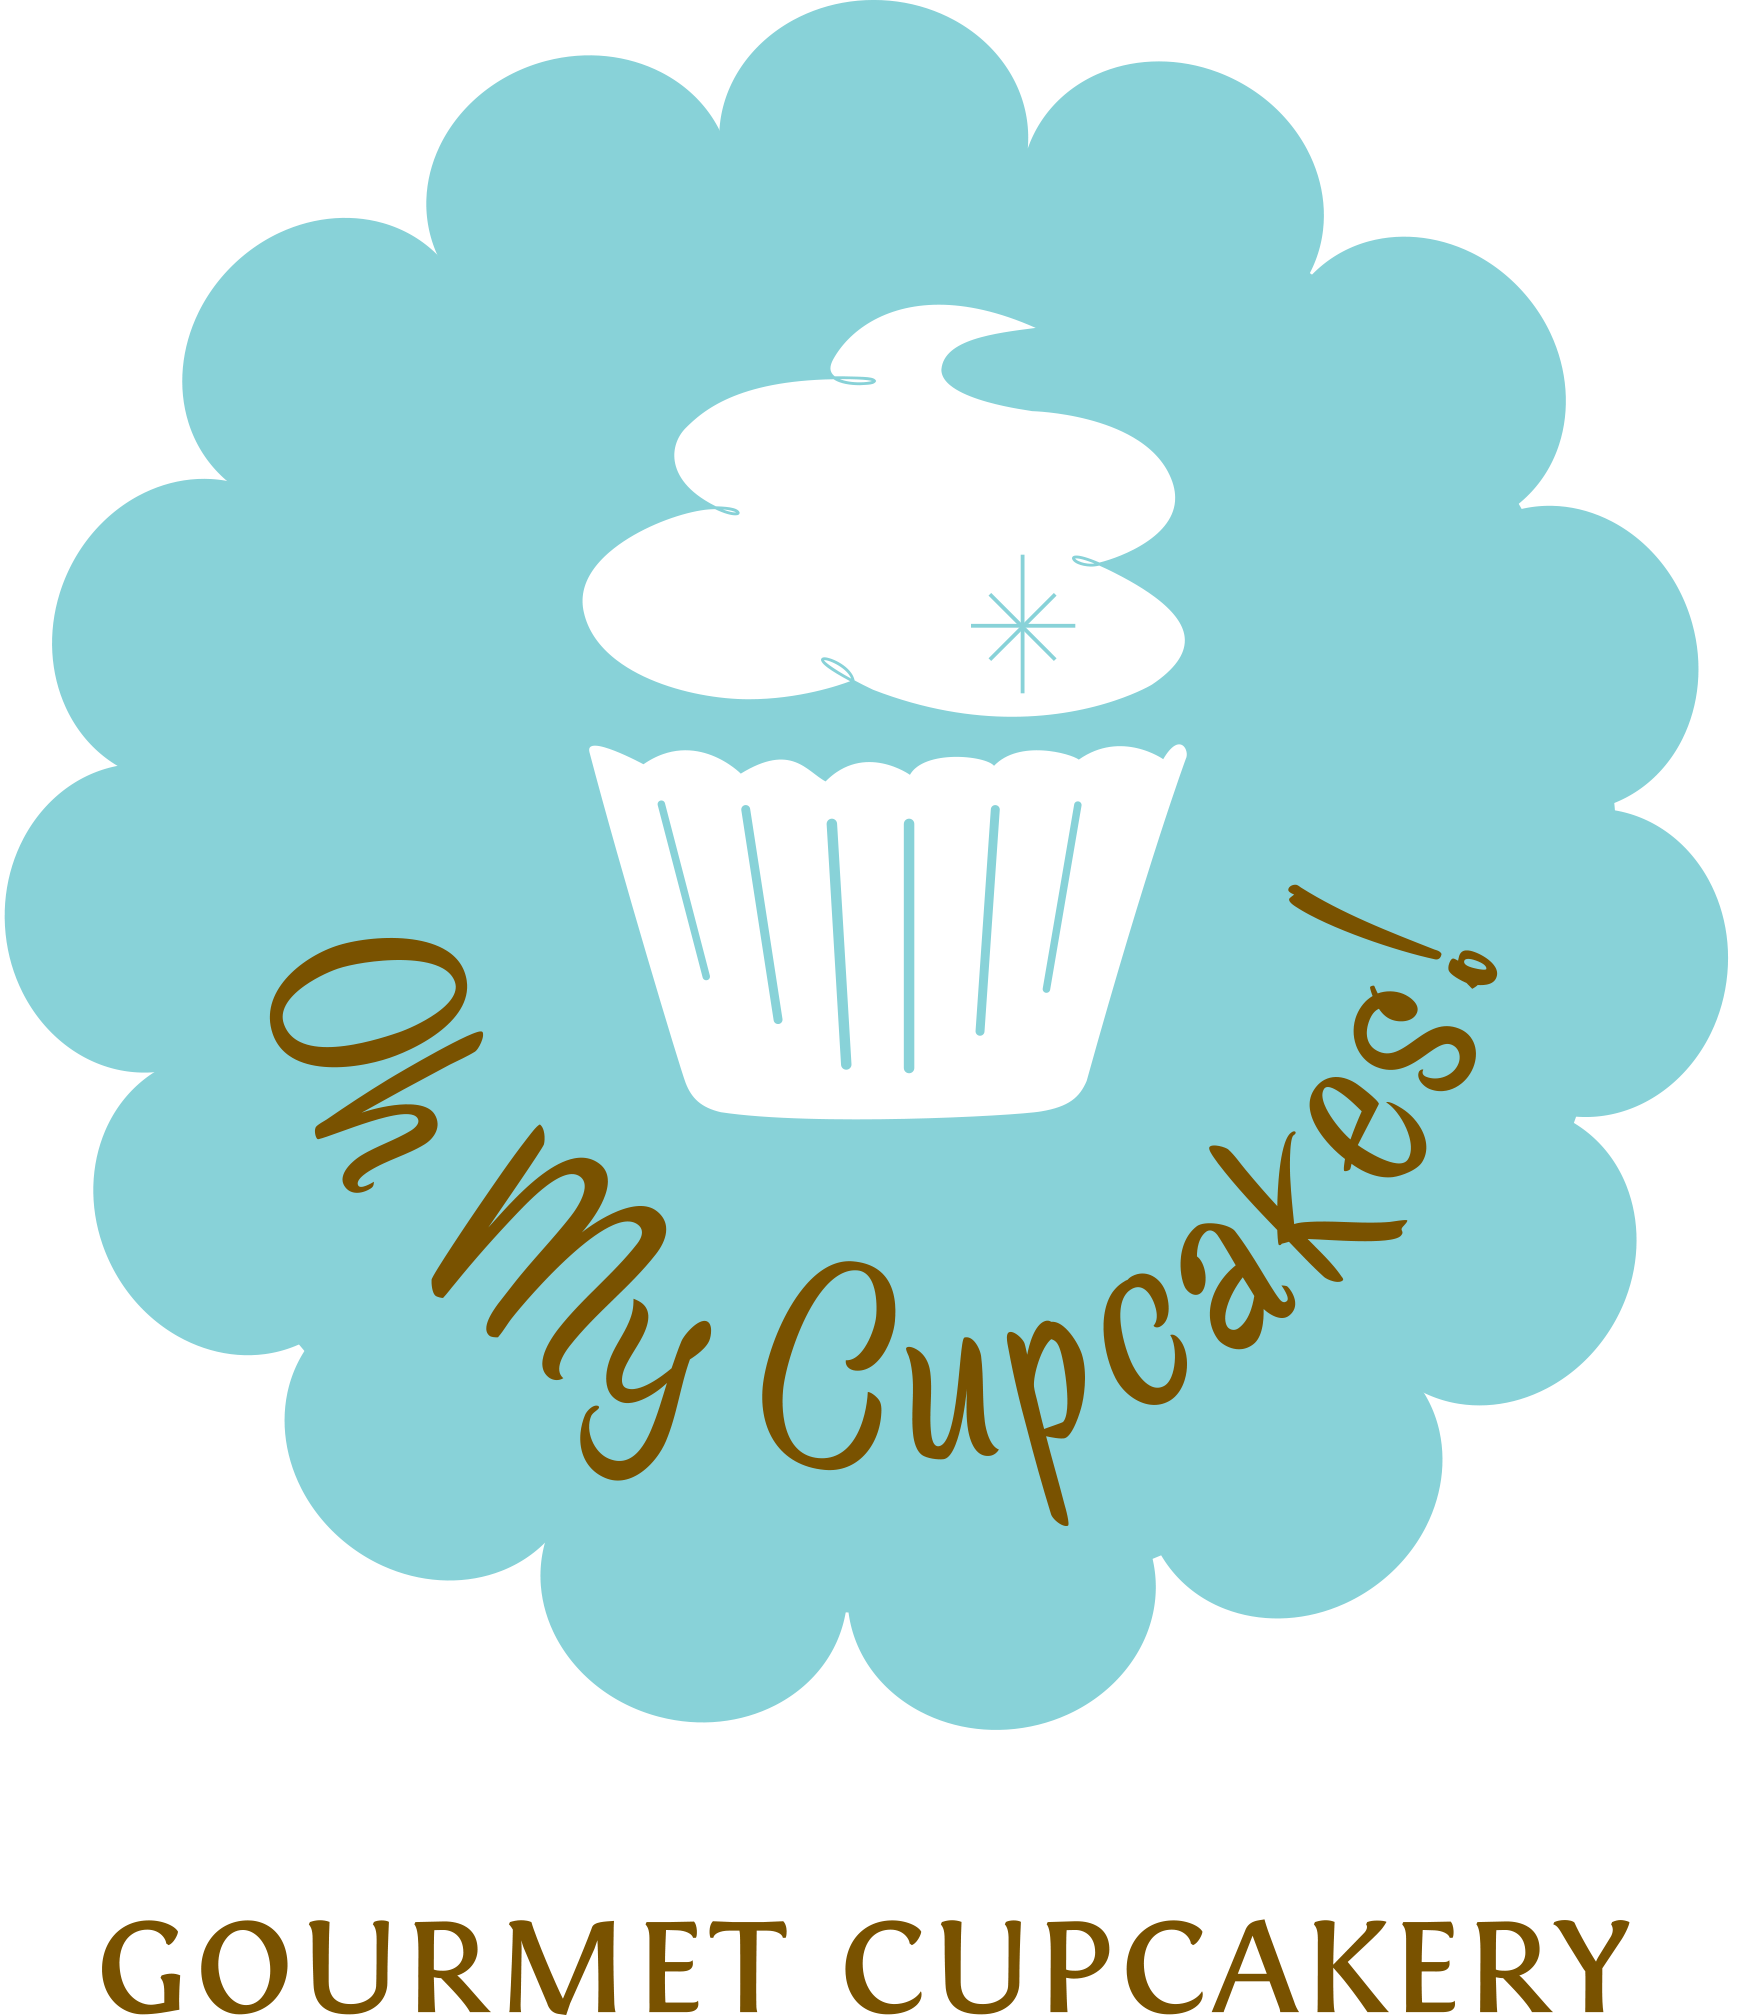 Oh My Cupcakes